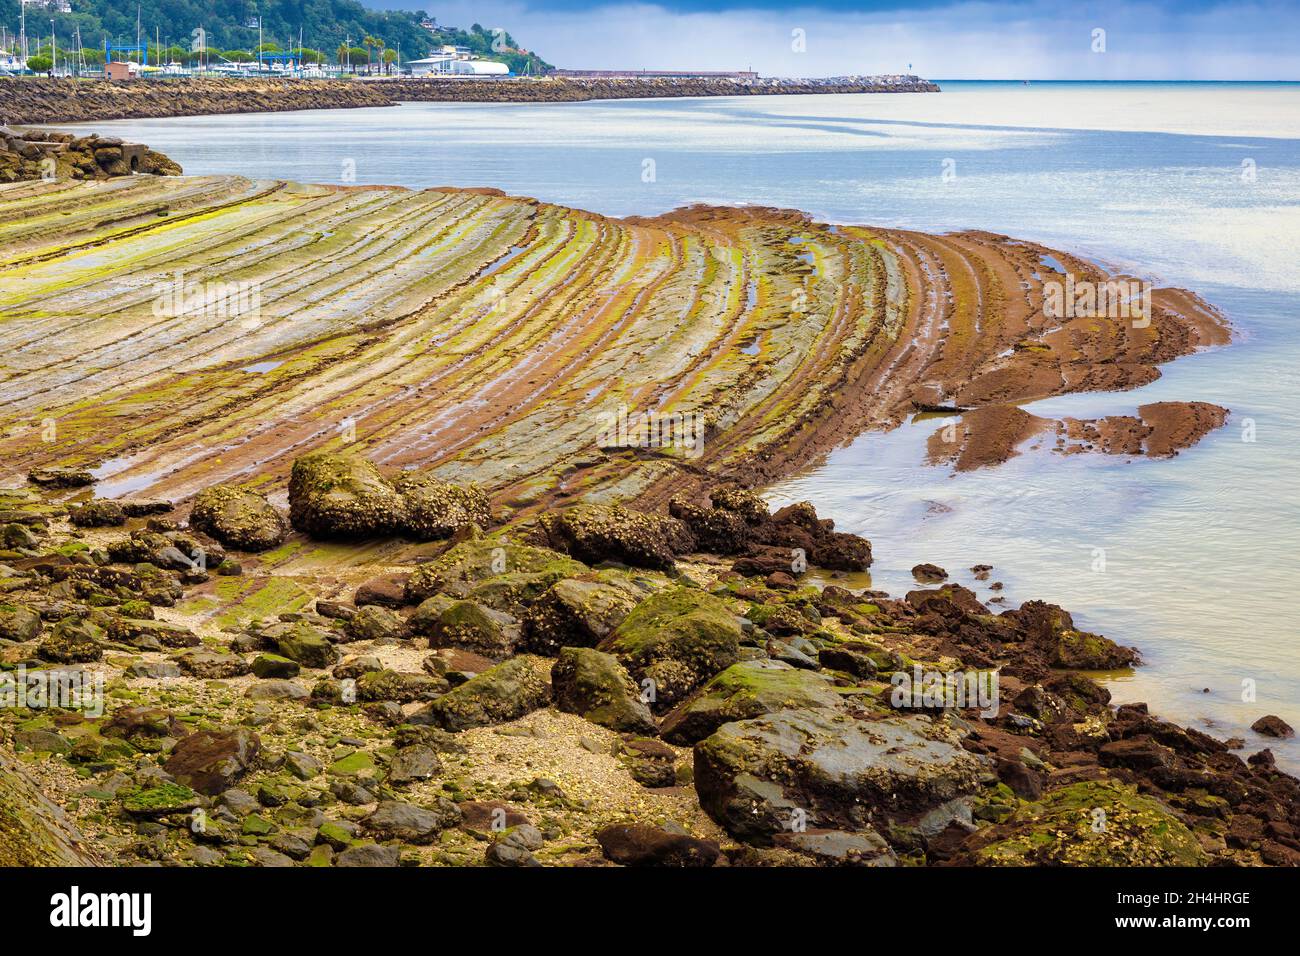 Spectacular rocks uncovers the low tide in the cove of the Bidasoa river in Hondarribia, Euskadi, Spain Stock Photo